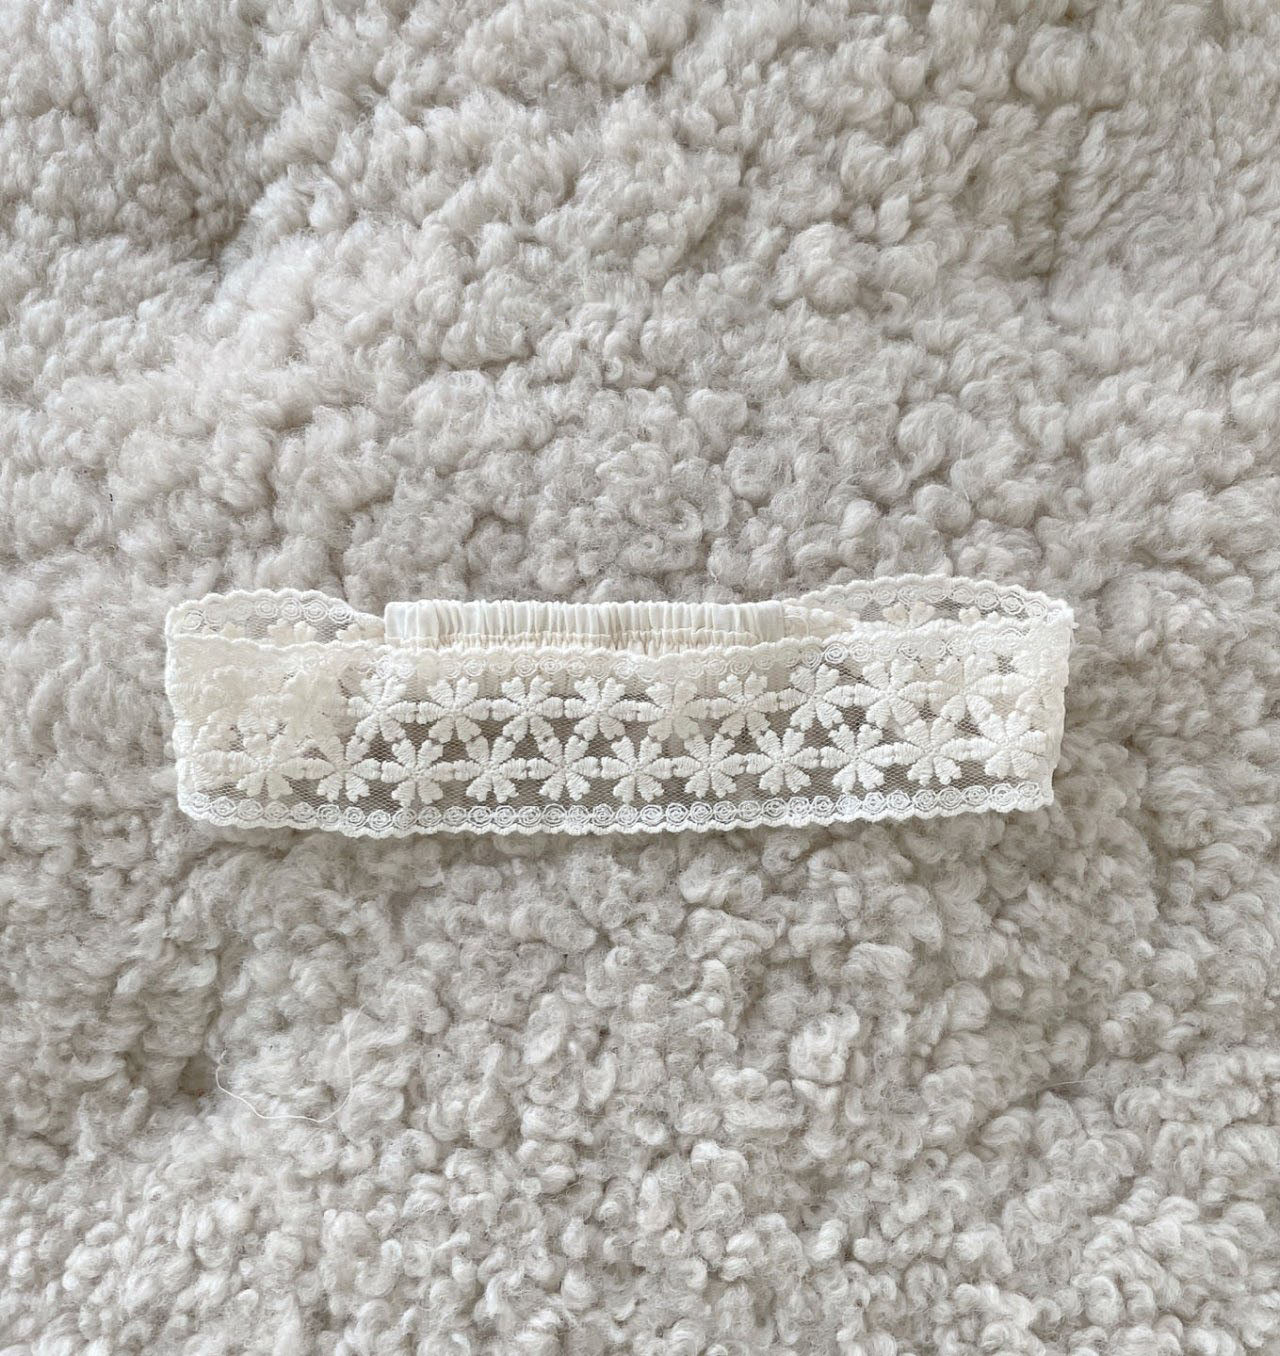 Floral Lace Headband_ 2 Types